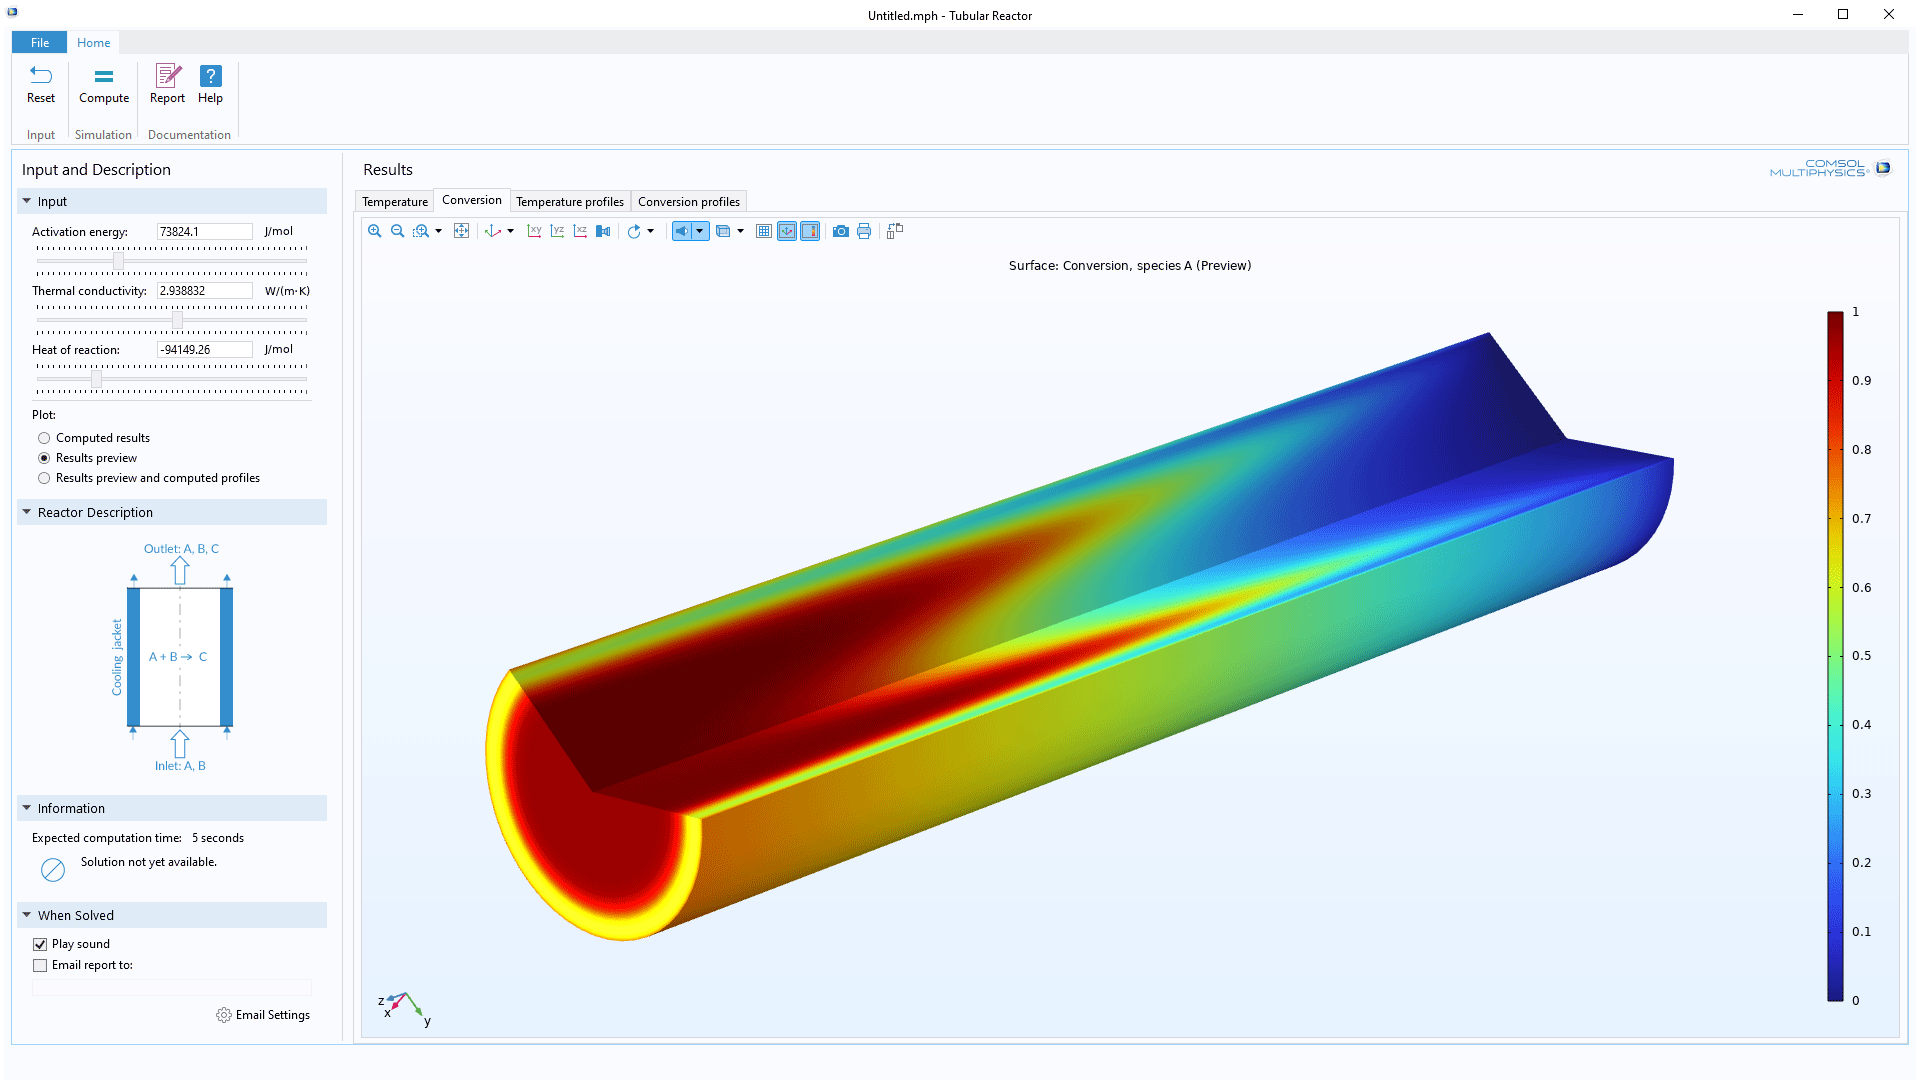 The Tubular Reactor Surrogate App showing the conversion plot within the Graphics window.